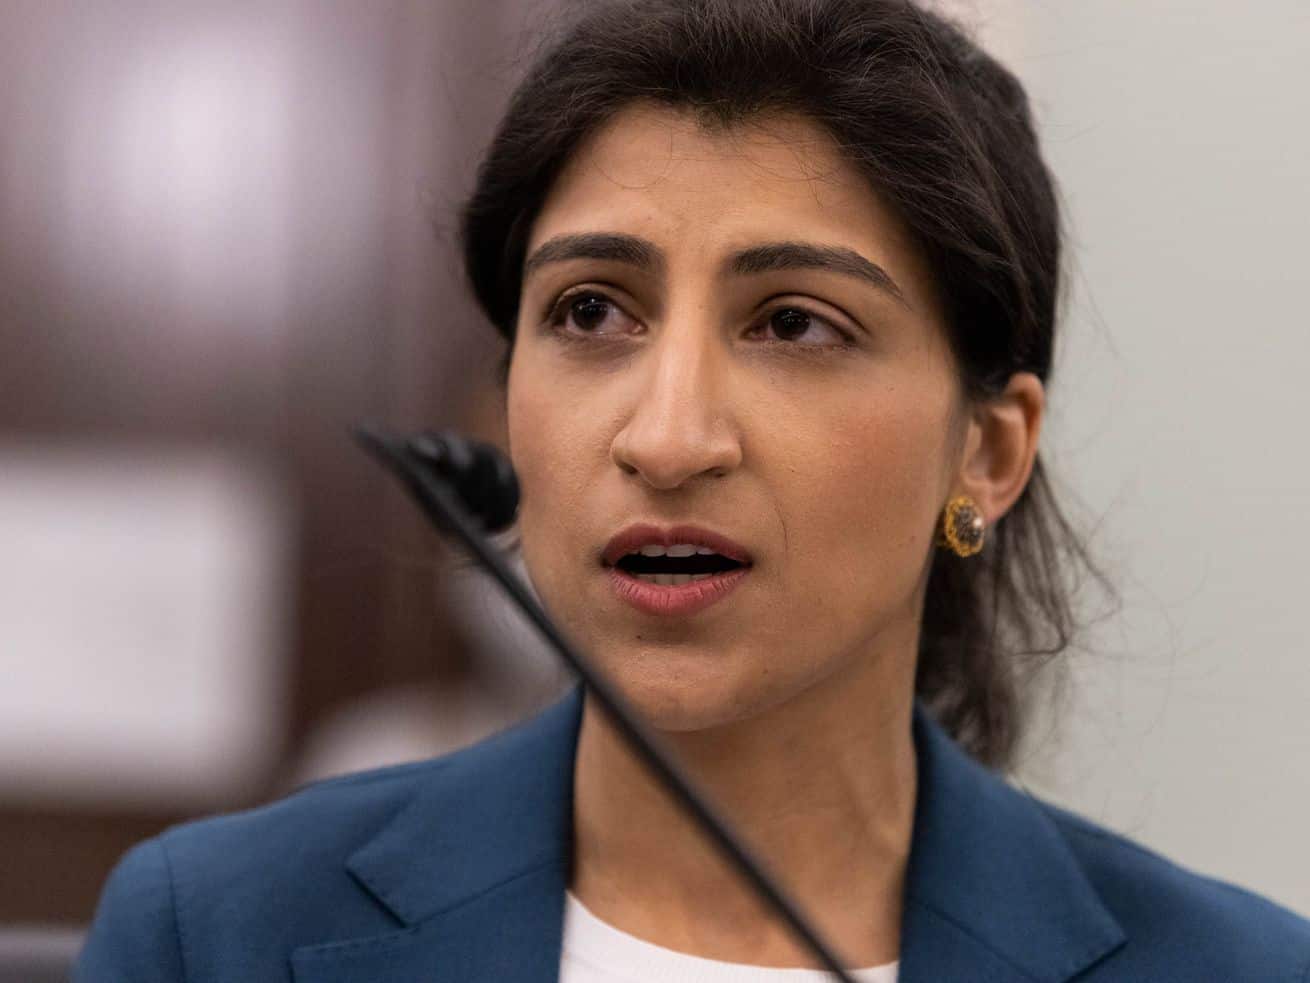 Lina Khan is joining the FTC, and Big Tech should be worried